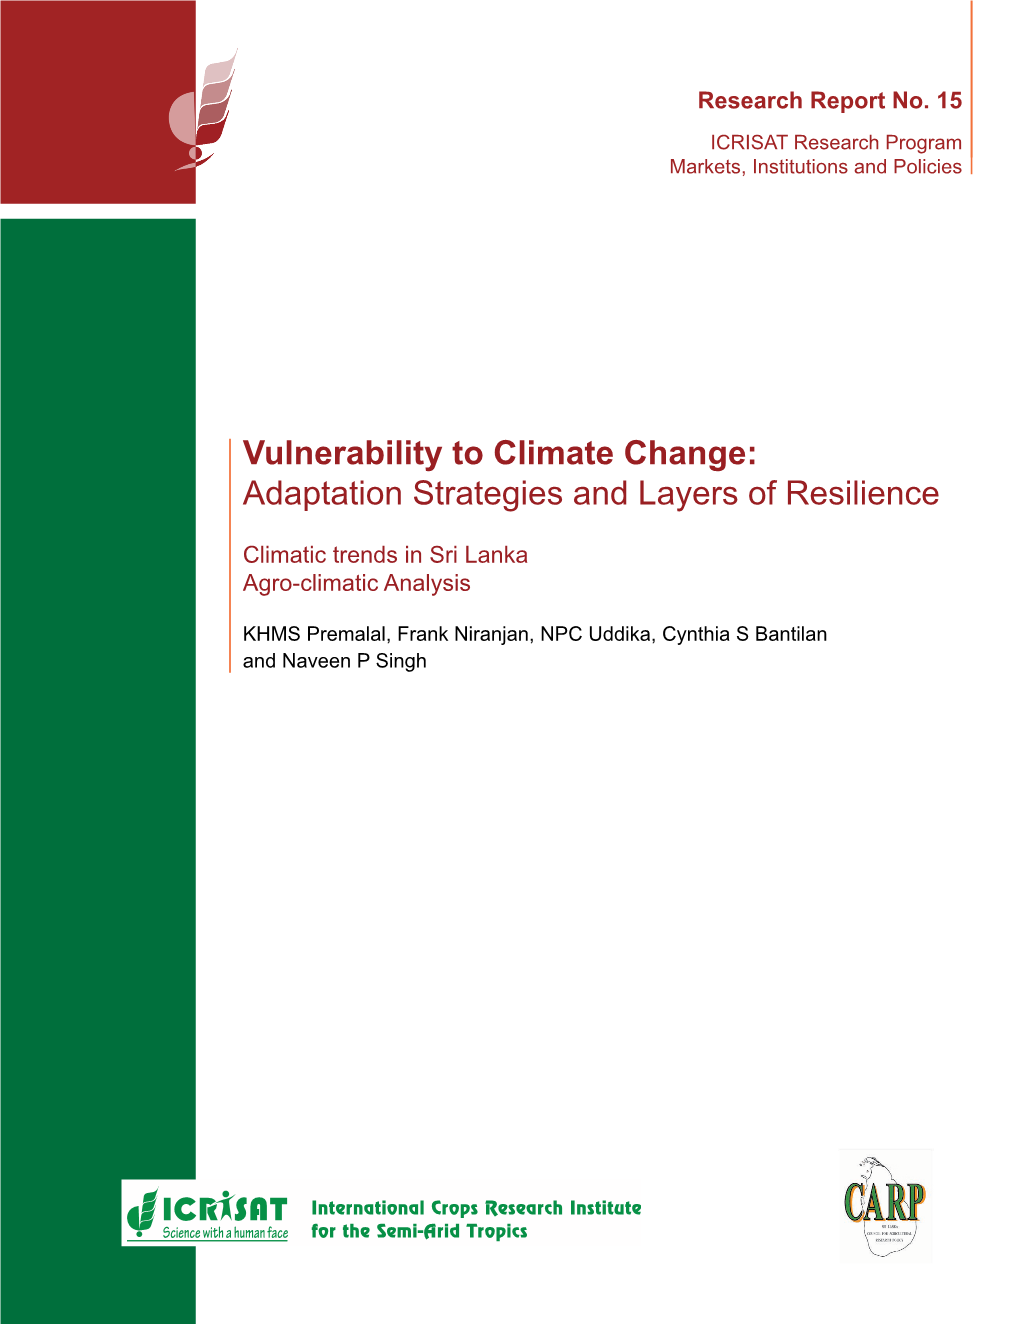 Vulnerability to Climate Change: Adaptation Strategies and Layers of Resilience